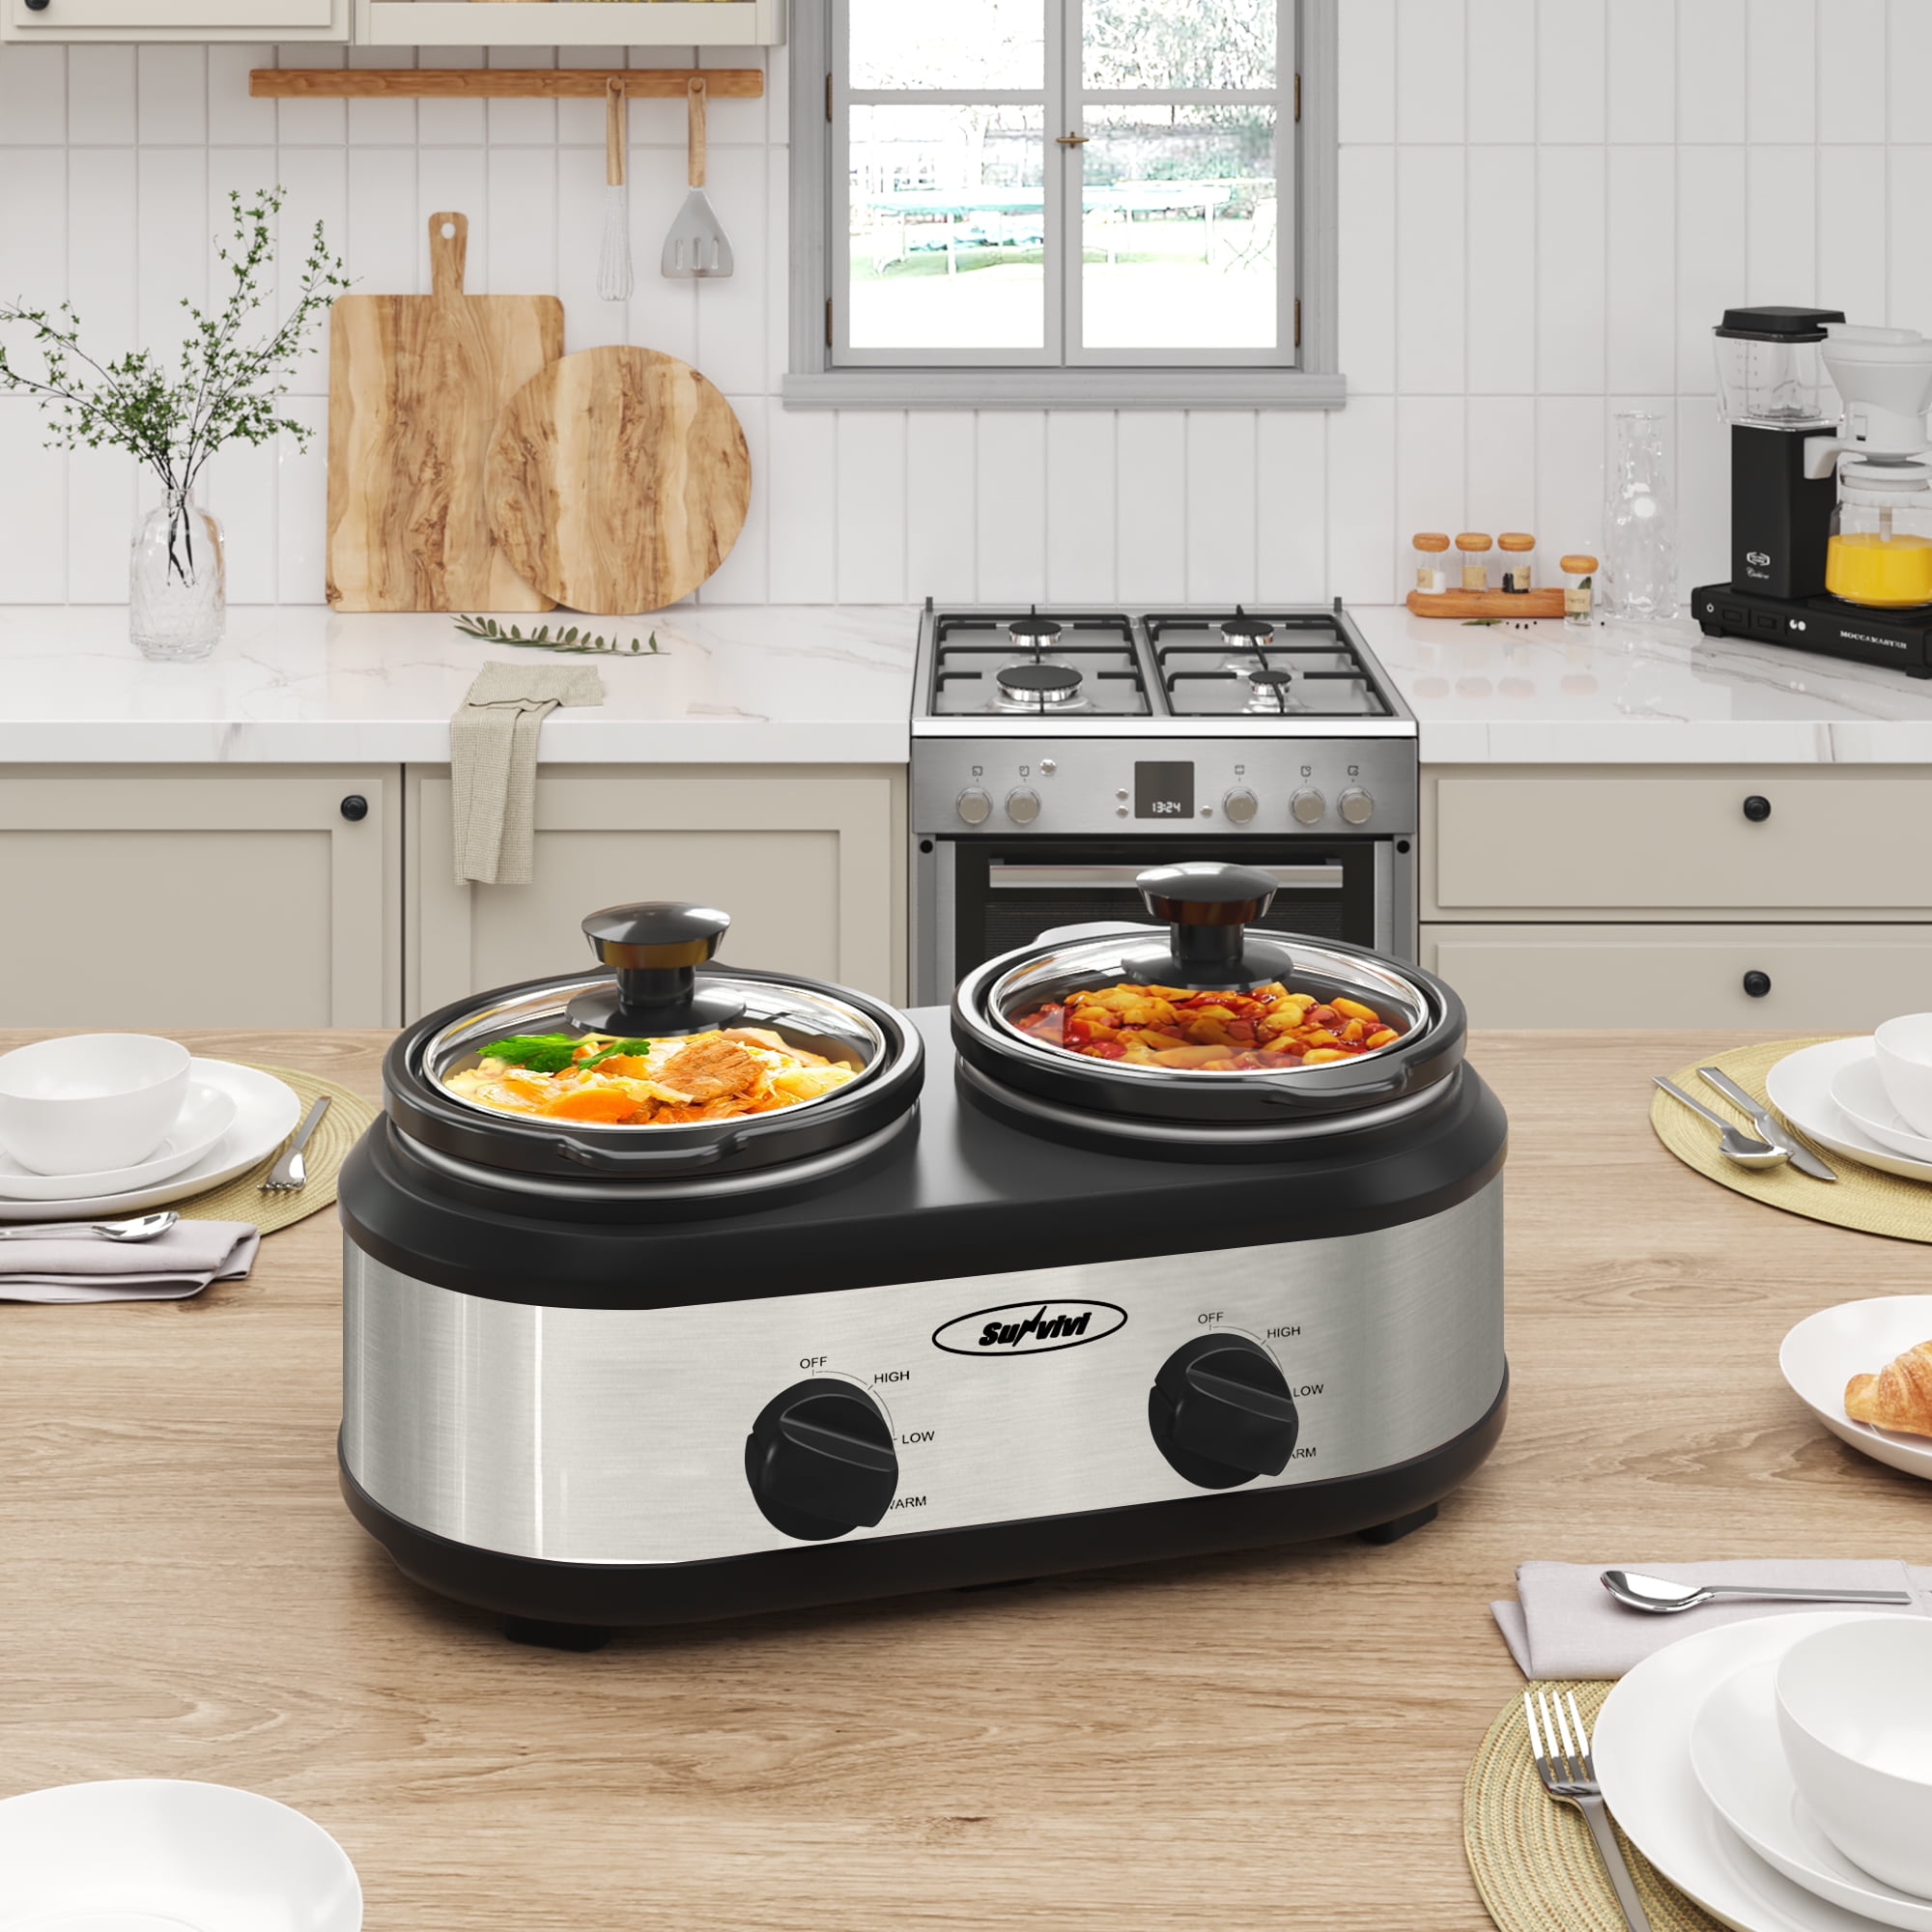  Crock-Pot® 3-in-1 Multi-Cooker, Stainless Steel: Home & Kitchen